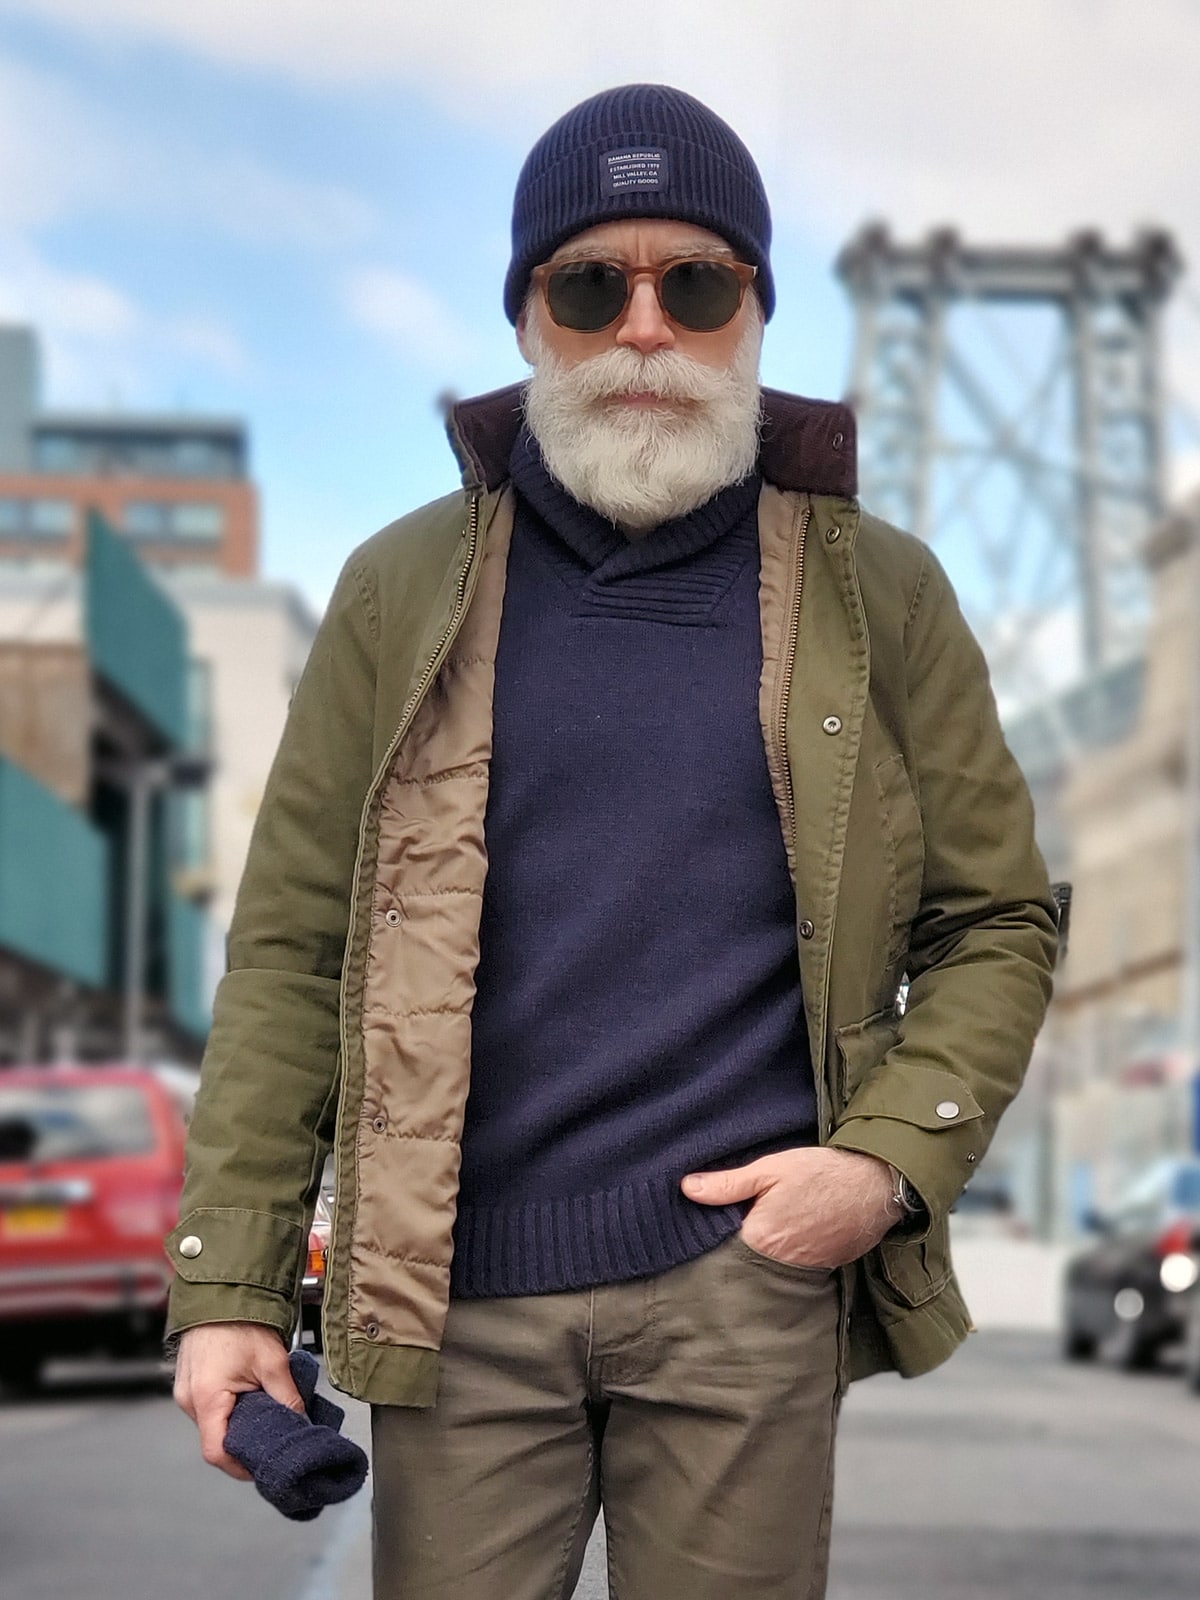 Waxed Jacket with Knit Cap - The Modest Man